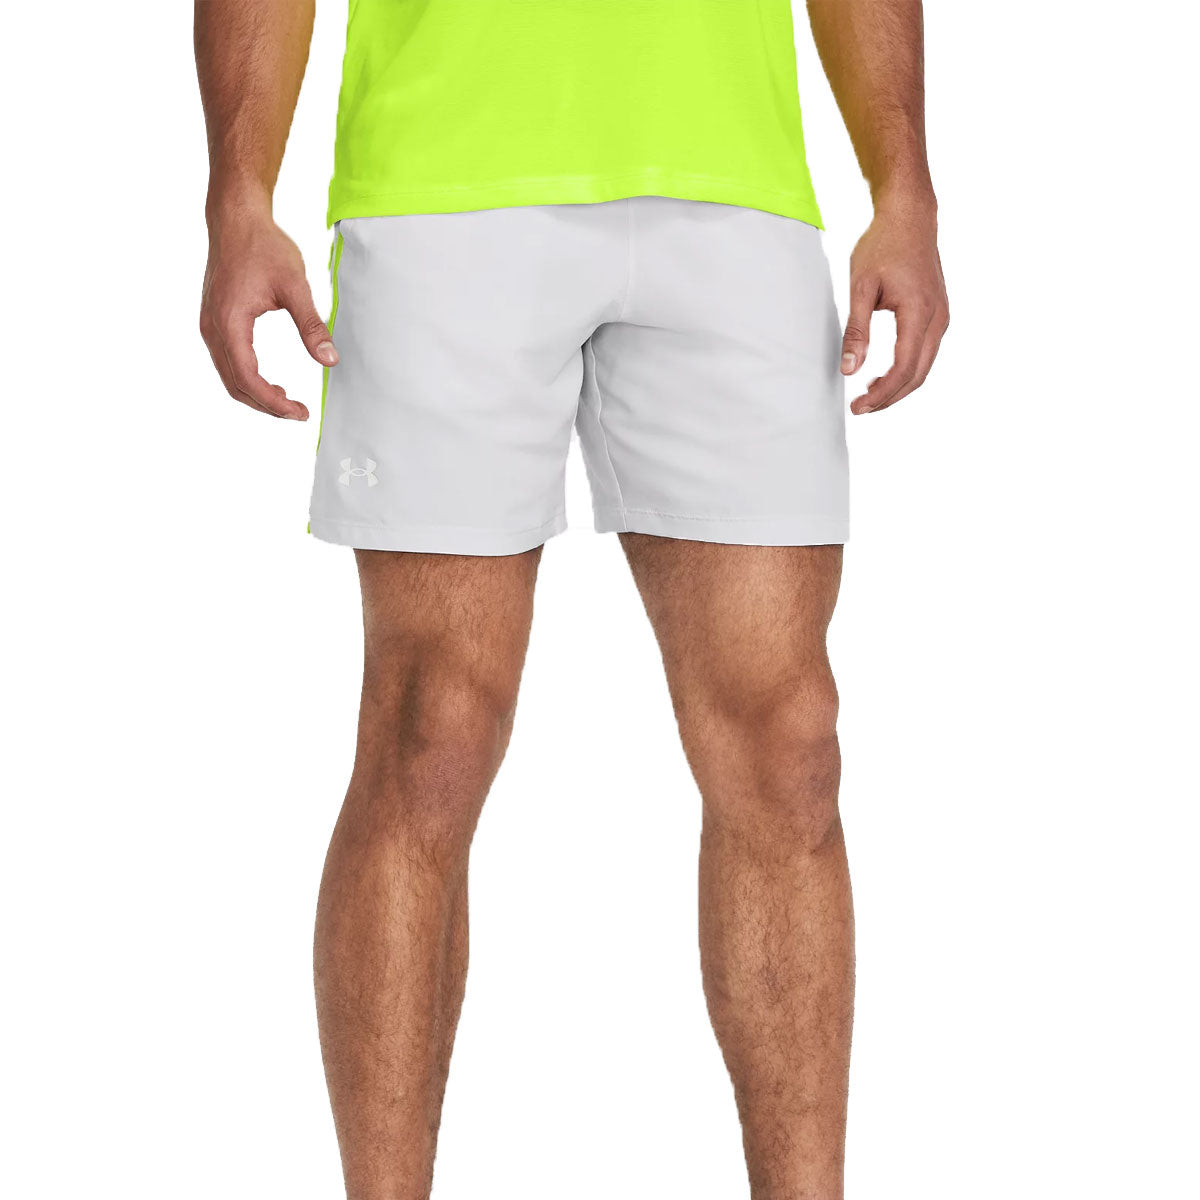 Under Armour Launch 7 inch Running Shorts - Mens - Halo Grey/High Vis Yellow/Reflective